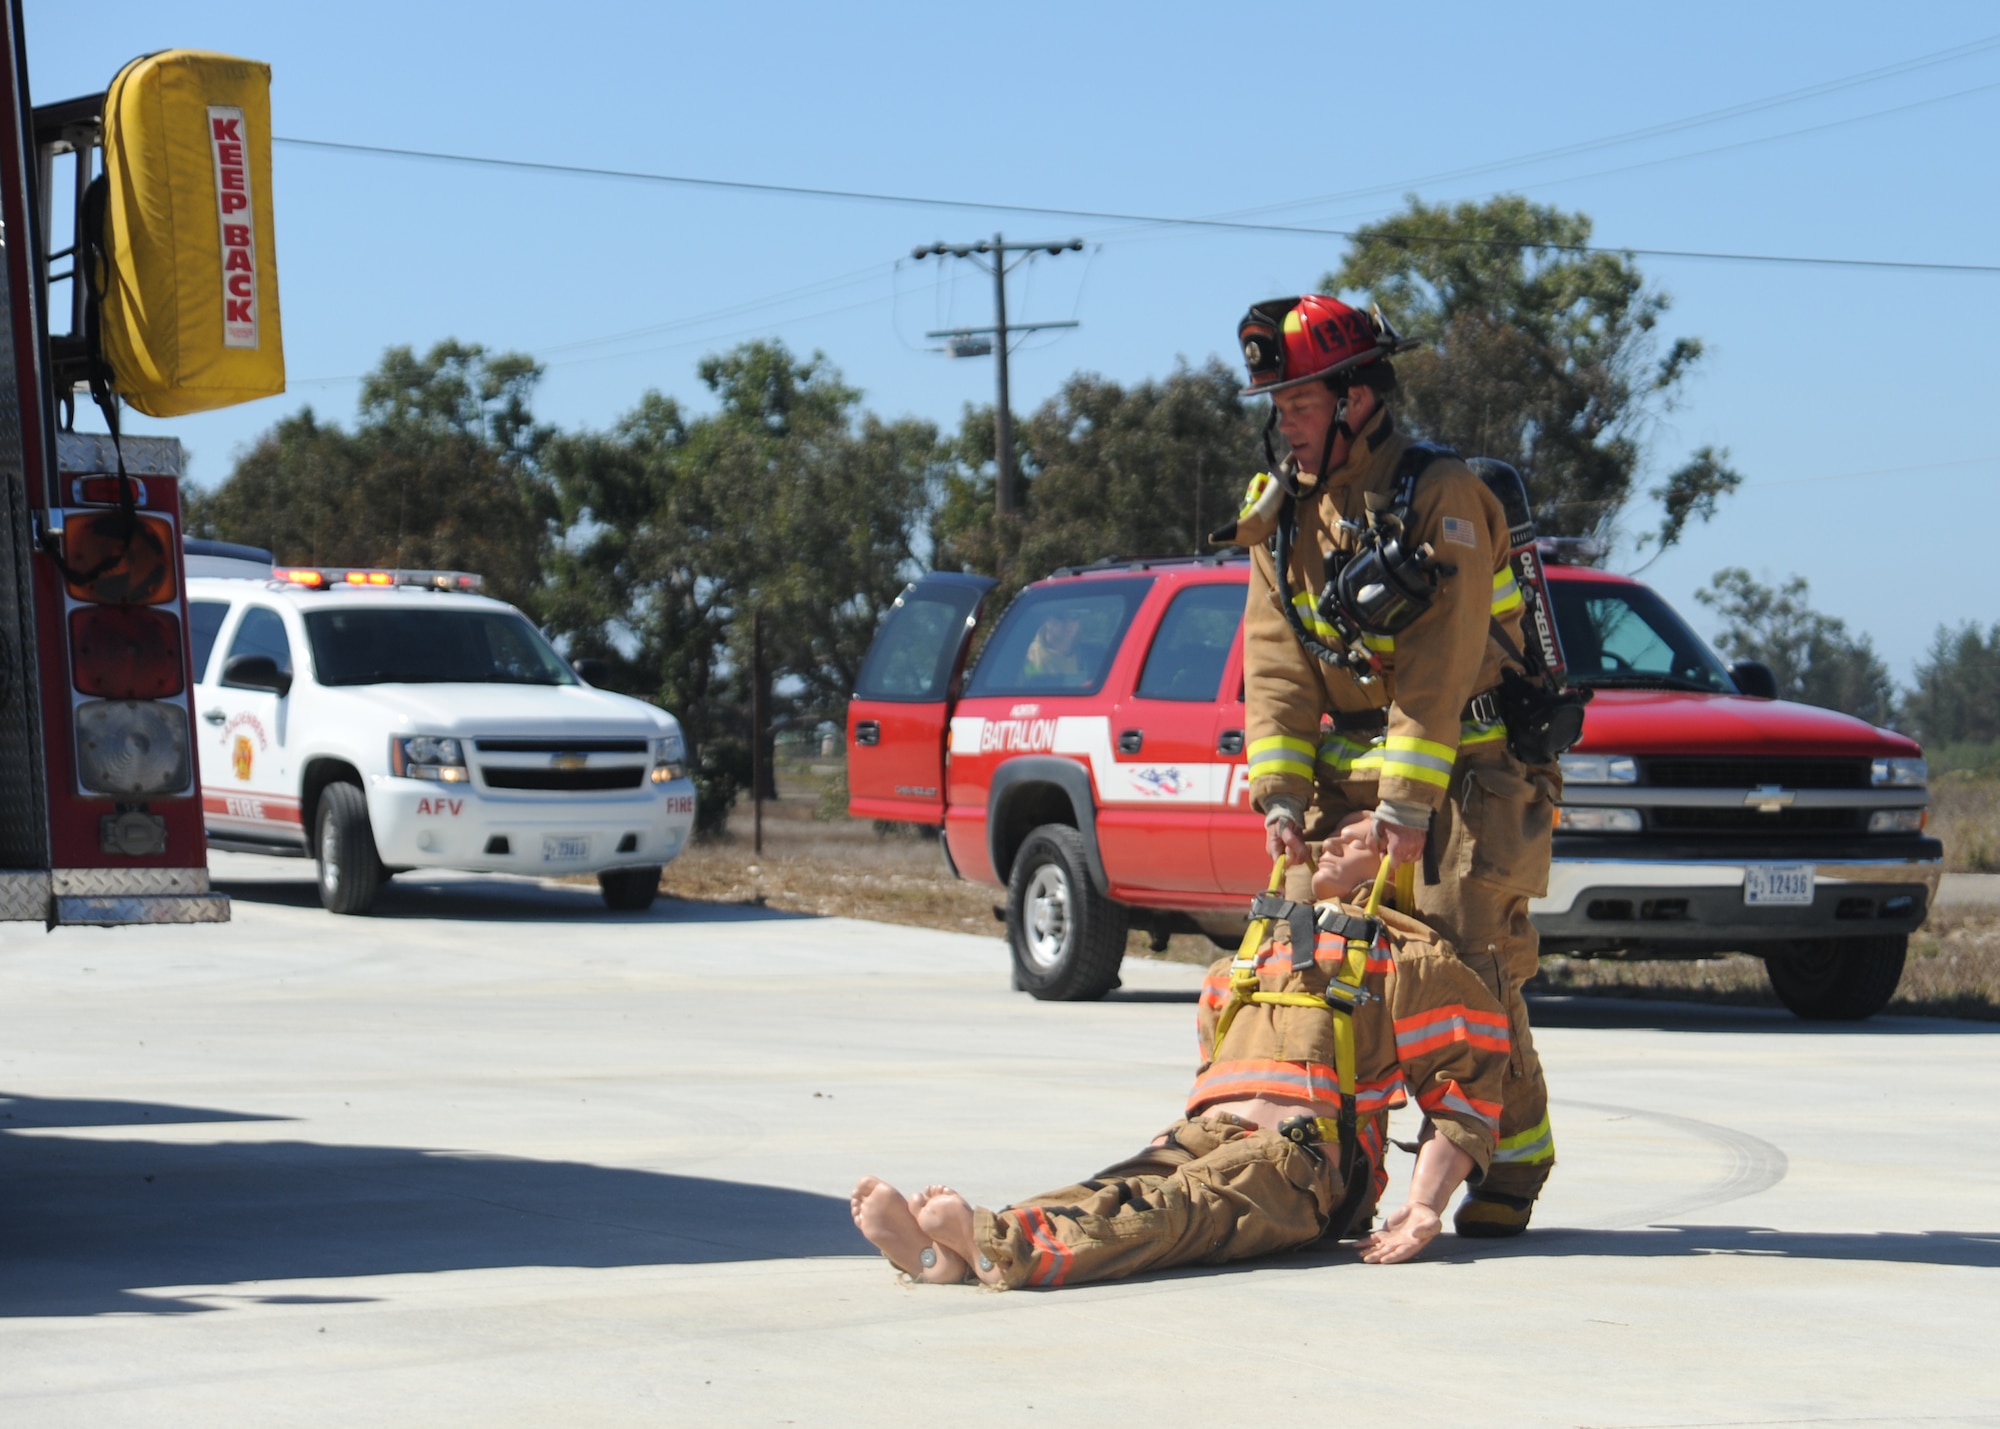 VANDENBERG AIR FORCE BASE, Calif.-- Firefighters practice searching for victims in a simulated burning building Oct. 8 here.(U.S. Air Force photo/Airman 1st Class Andrew Satran)
